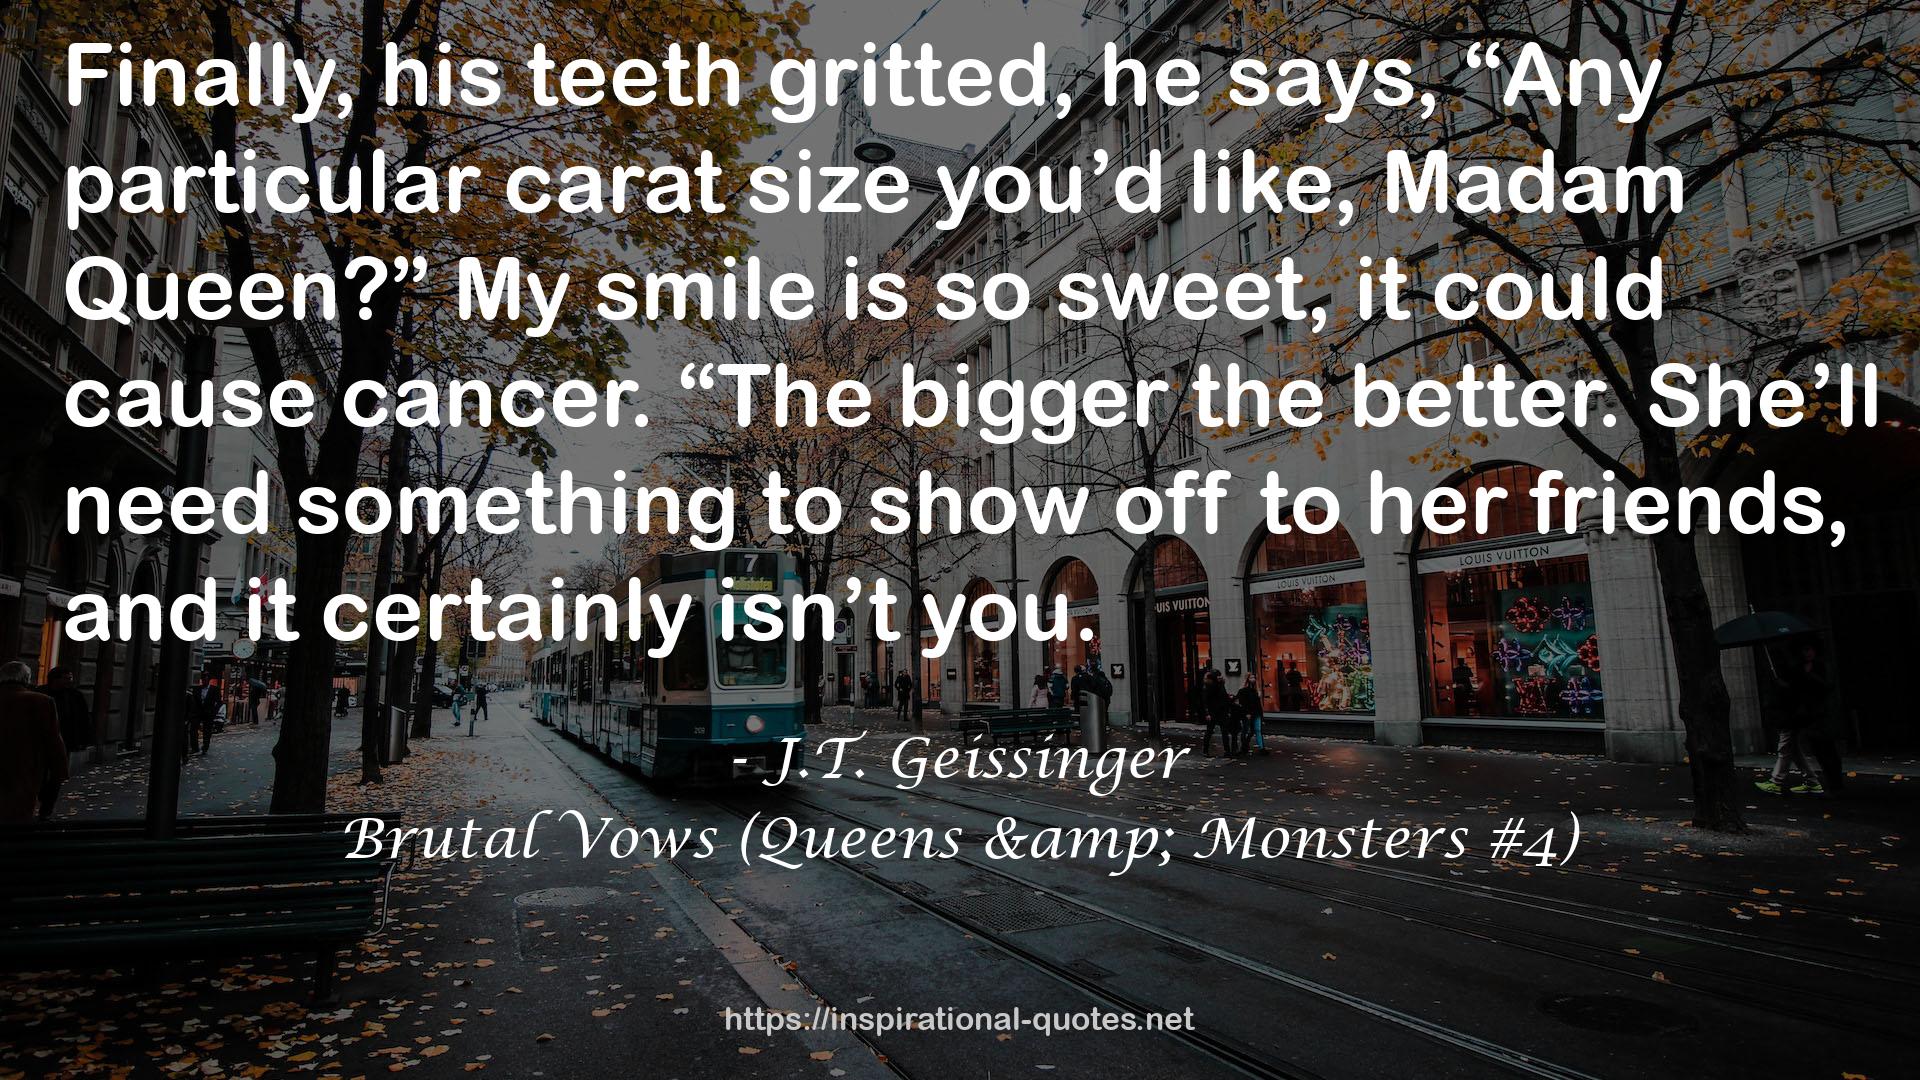 Brutal Vows (Queens & Monsters #4) QUOTES